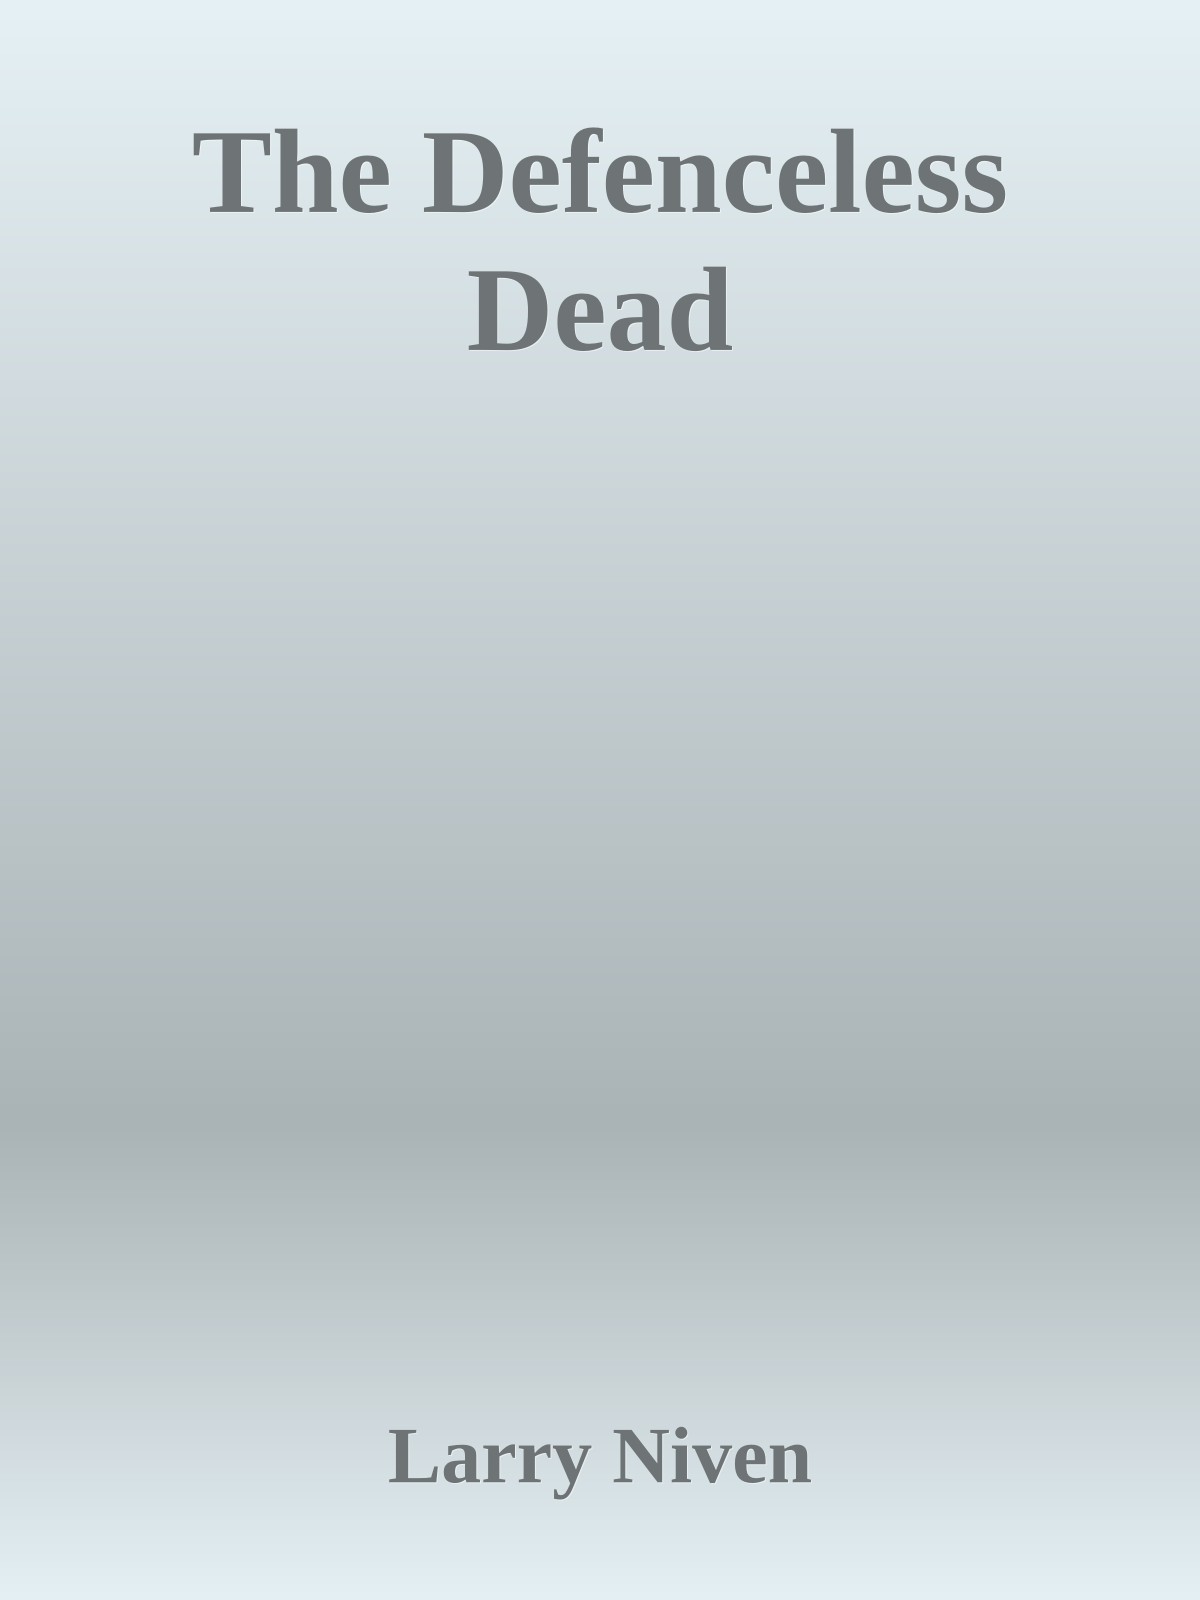 The Defenceless Dead